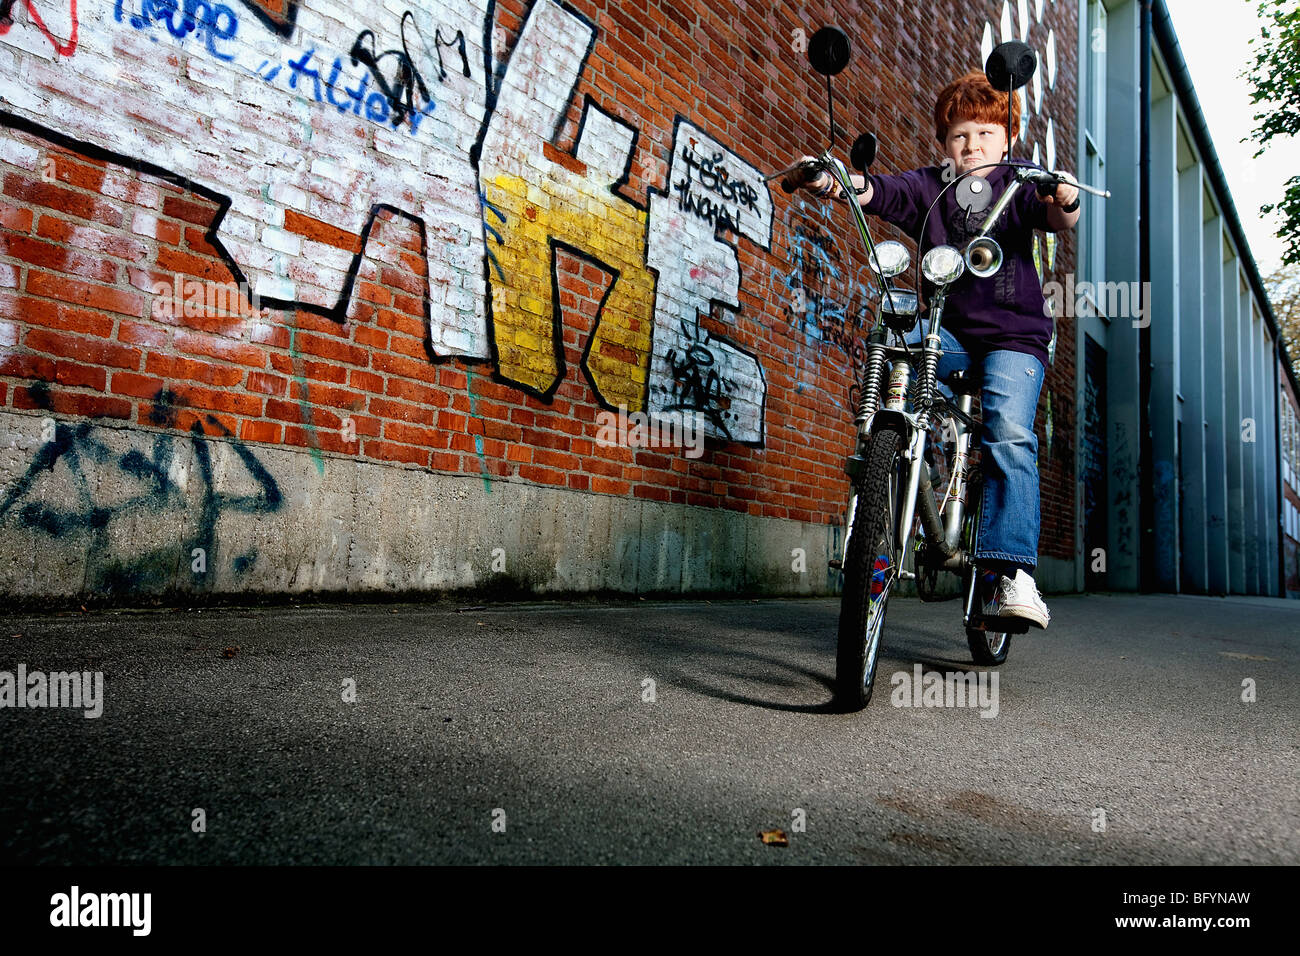 red haired boy on chopper bicycle Stock Photo